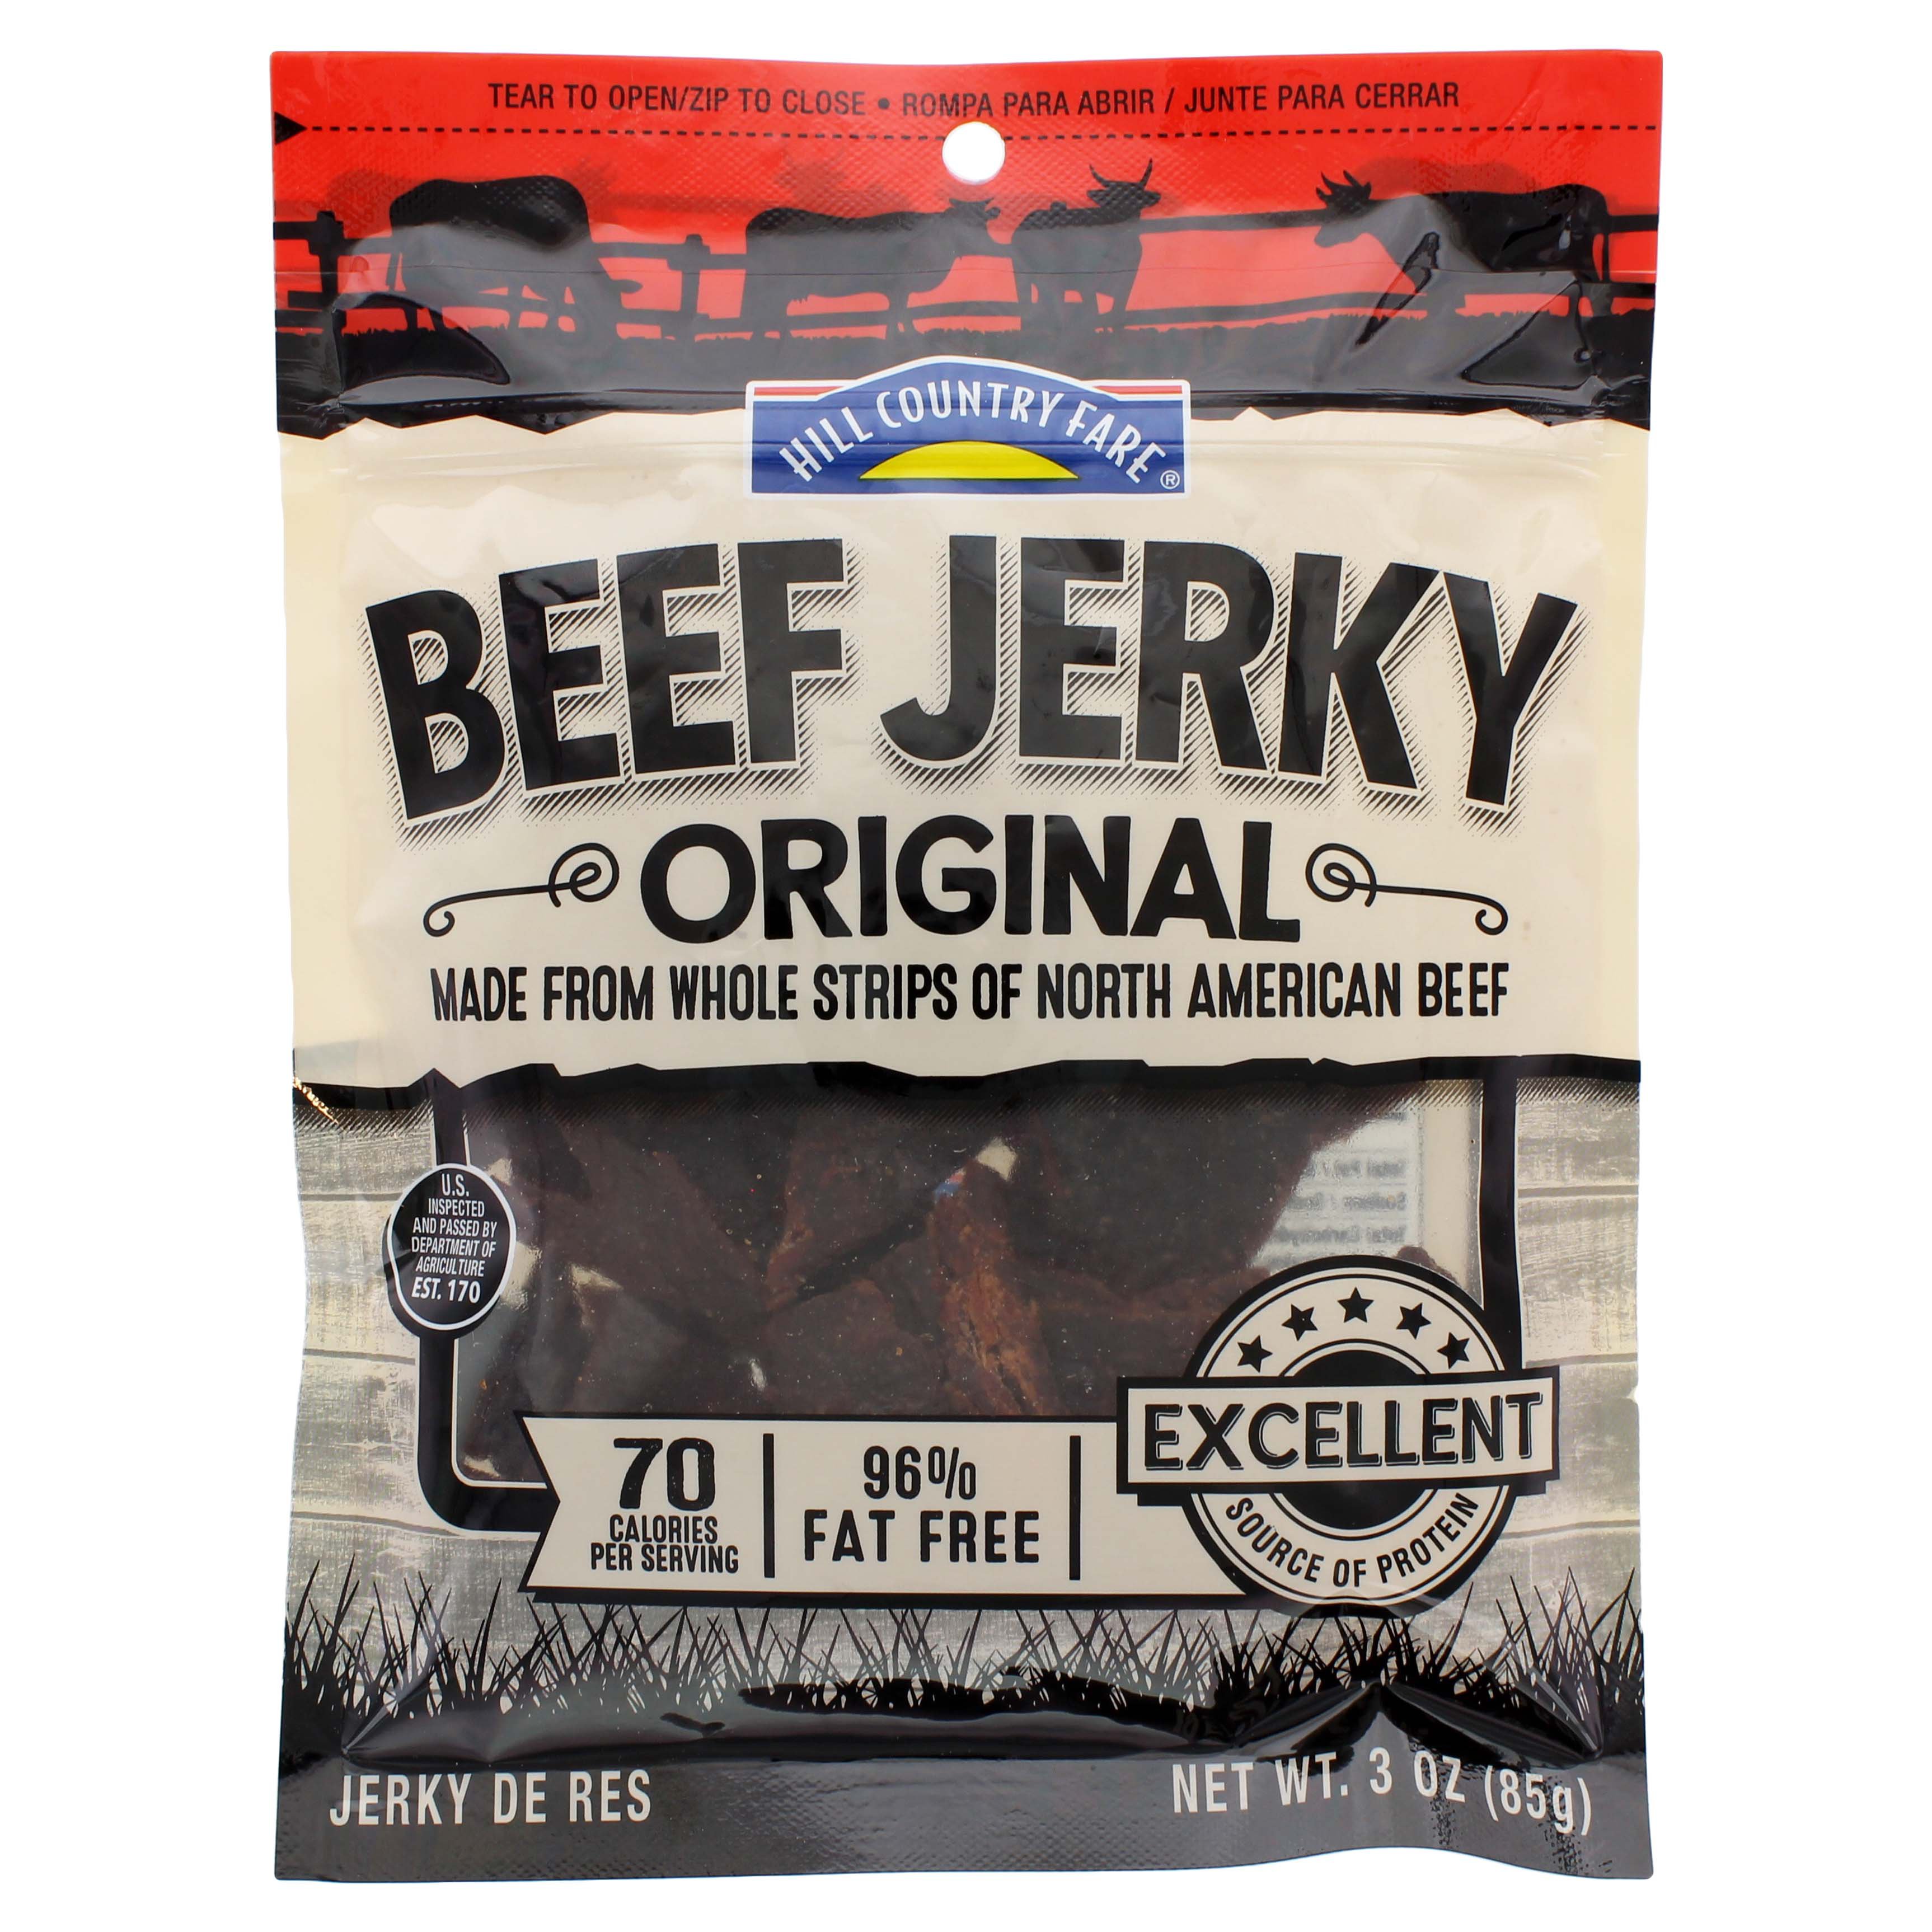 Hill Country Fare Original Beef Shop - H-E-B Jerky at Jerky